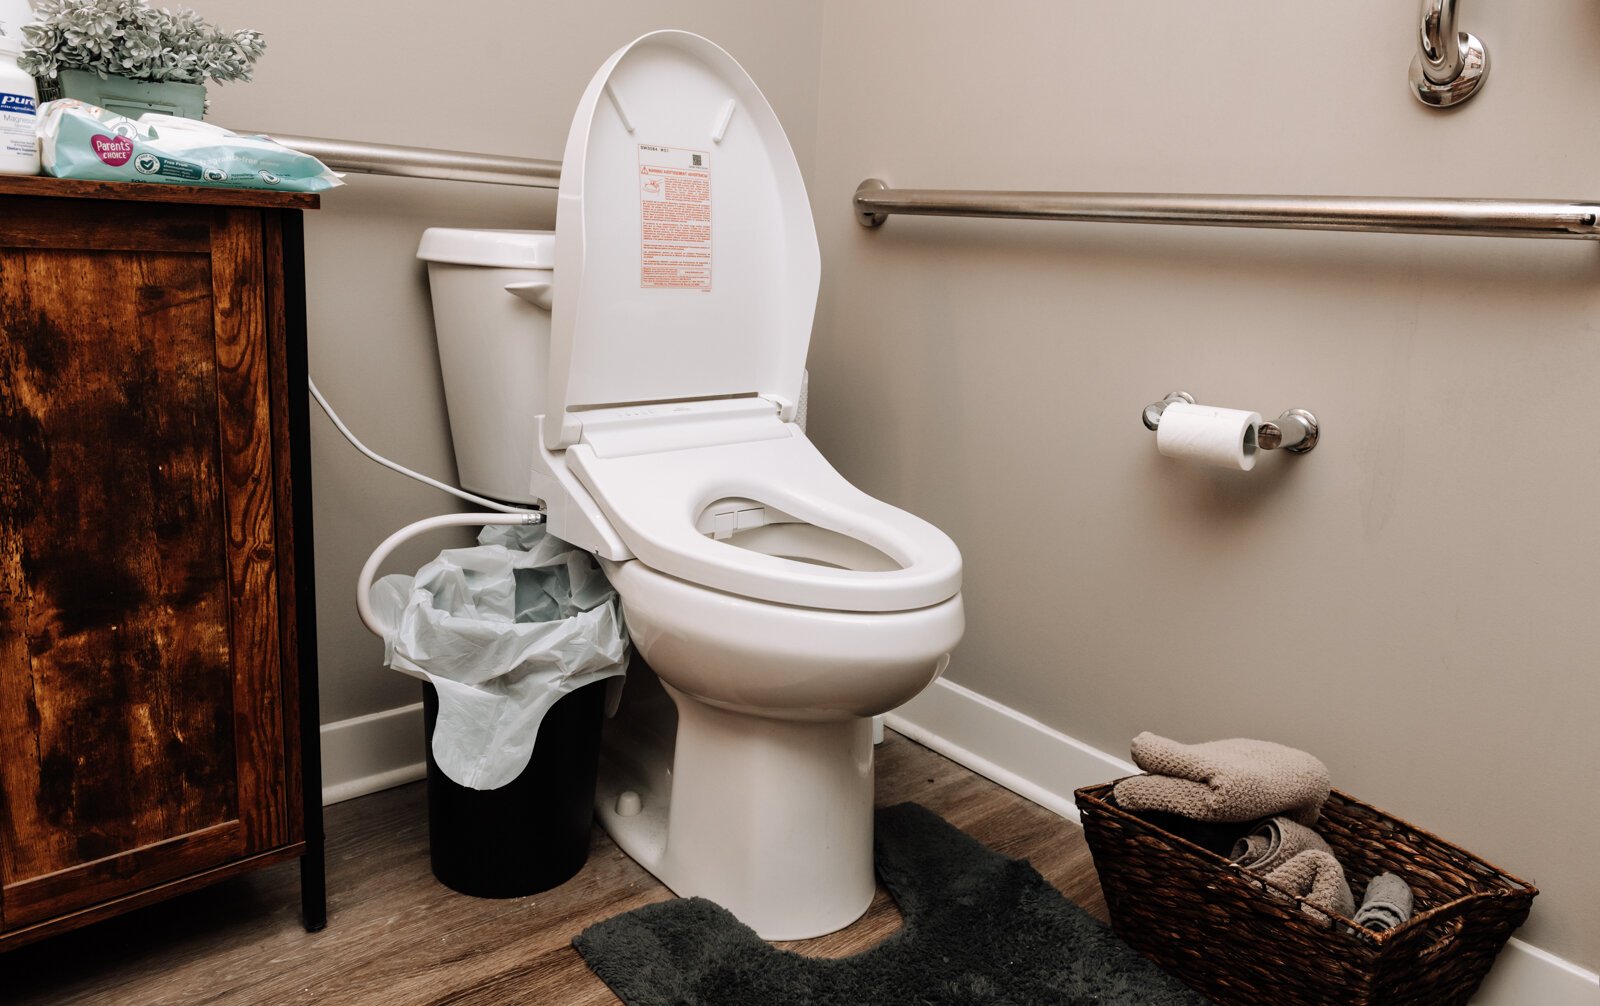 Labas added a bidet to his bathroom for better accessibility in his apartment.